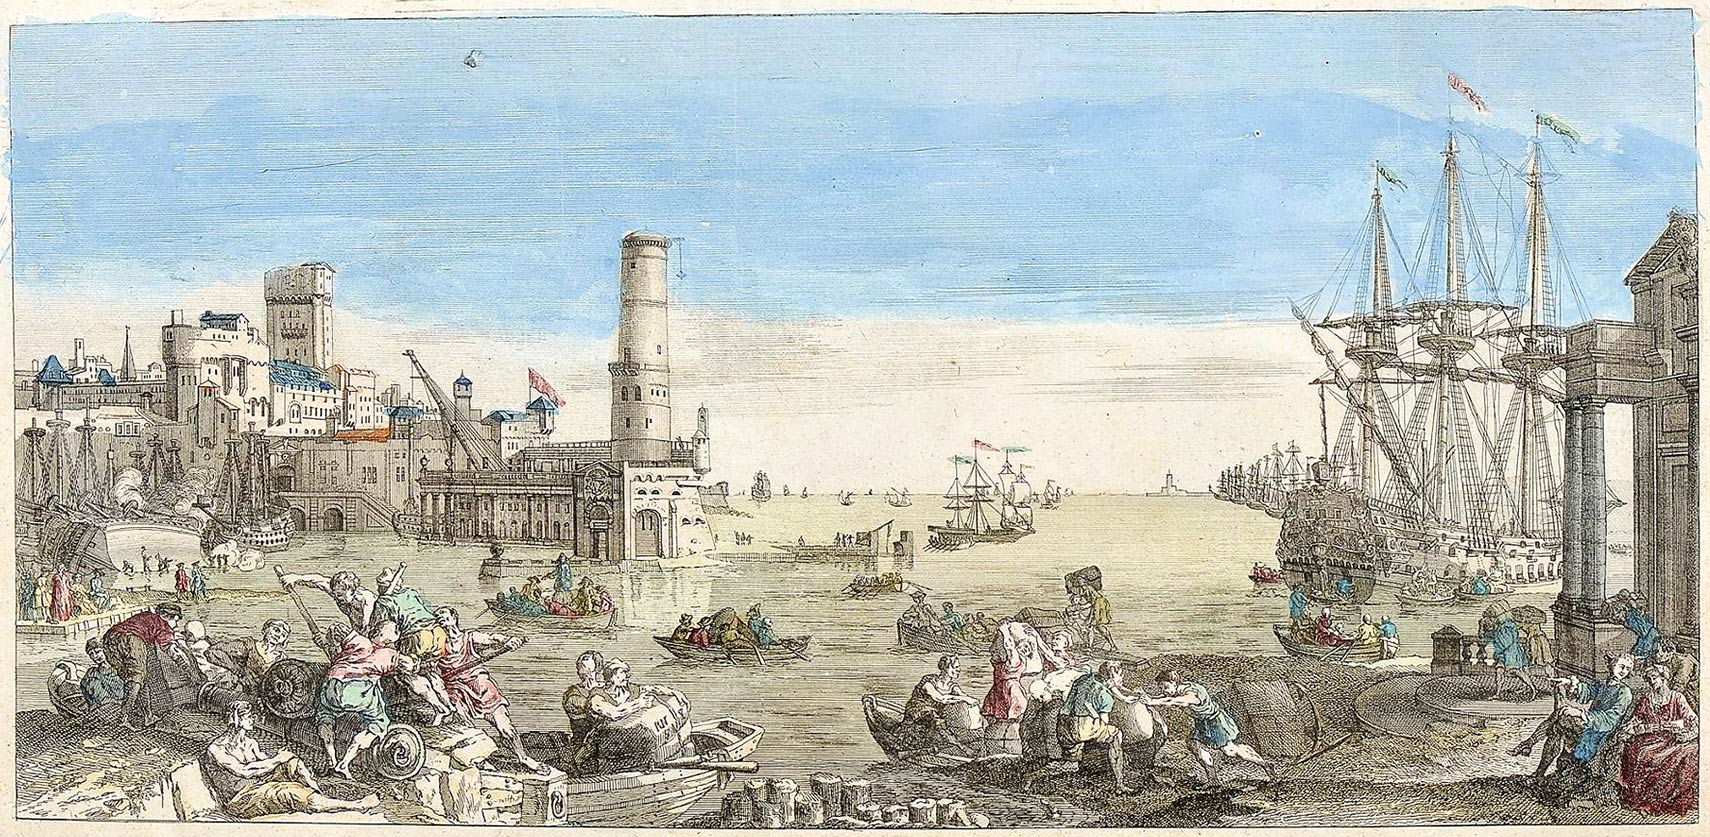 French print from the 18th century, shows an imaginative view of the port of Lisbon